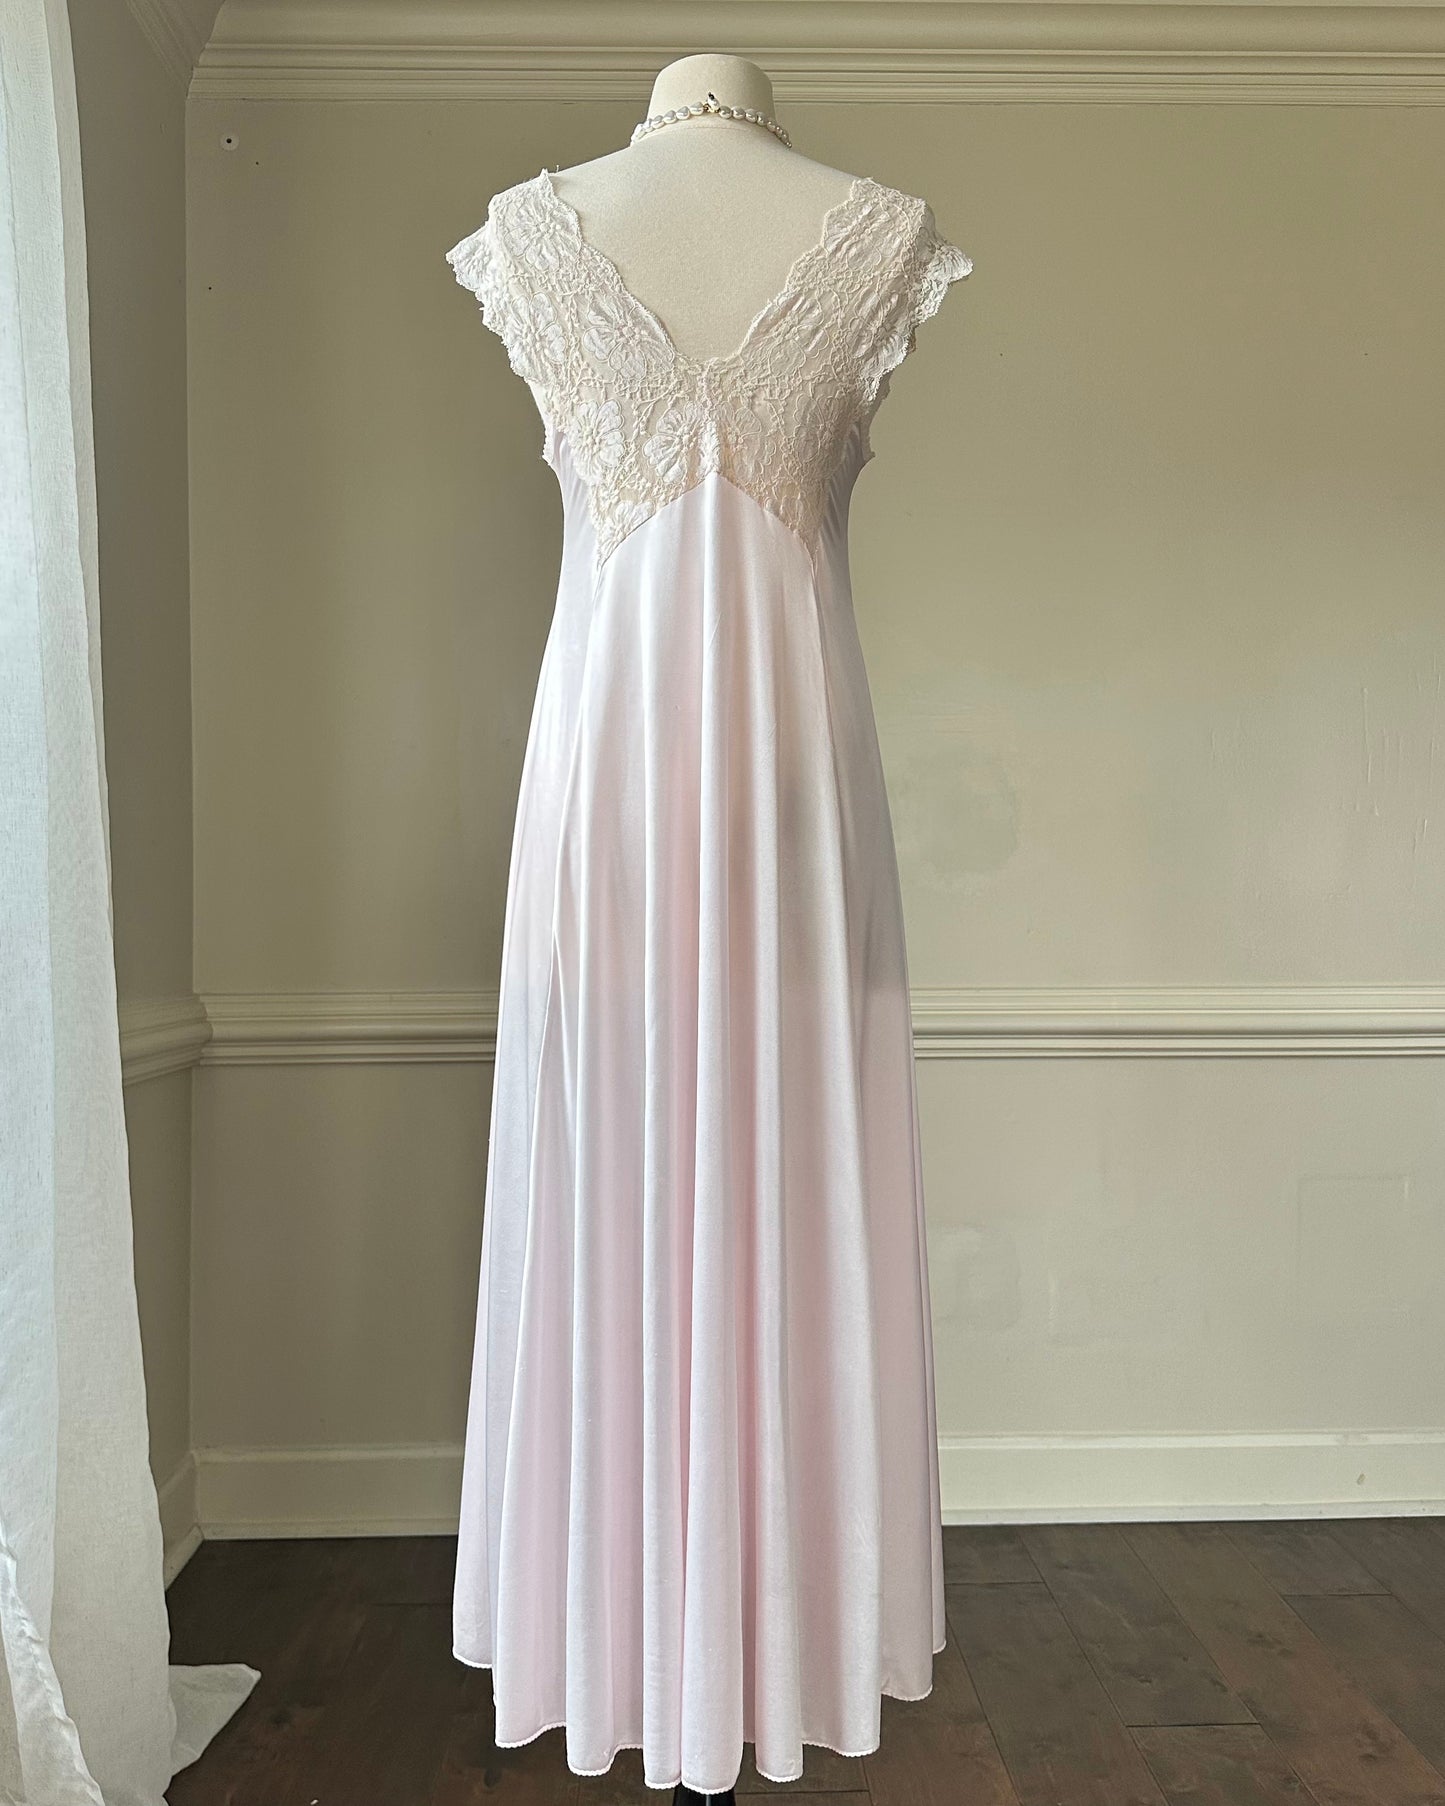 Romantic Soft Pink Satin Maxi Dress with Vintage Floral Overlay